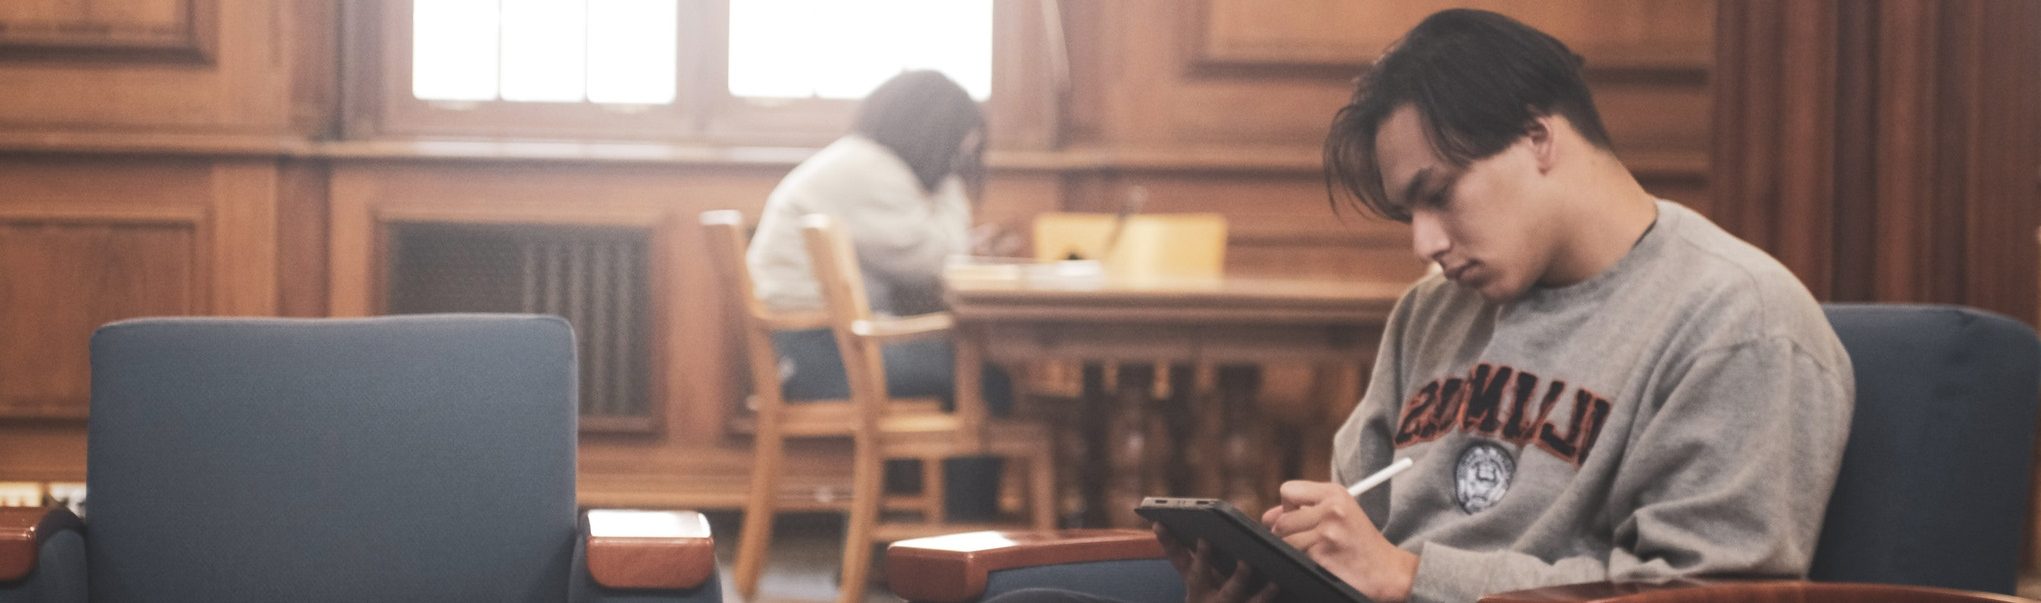 Decorative: two students studying separately in Main Library Room 204